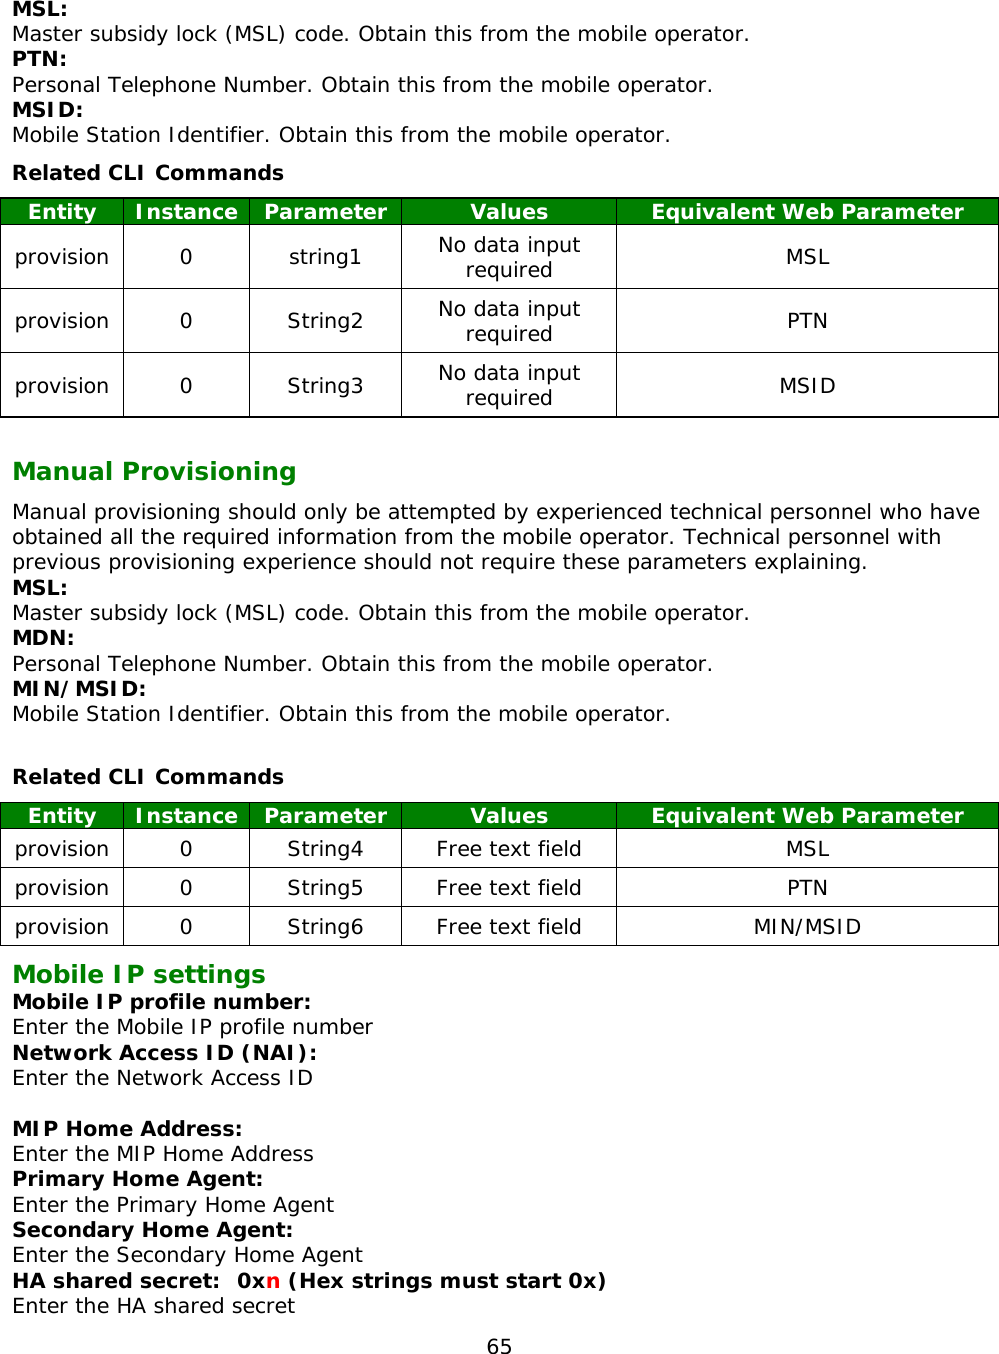 65   MSL: Master subsidy lock (MSL) code. Obtain this from the mobile operator. PTN: Personal Telephone Number. Obtain this from the mobile operator. MSID:  Mobile Station Identifier. Obtain this from the mobile operator. Related CLI Commands Entity Instance Parameter Values Equivalent Web Parameter provision   0  string1  No data input required MSL provision   0  String2 No data input required PTN provision   0  String3  No data input required MSID  Manual Provisioning Manual provisioning should only be attempted by experienced technical personnel who have obtained all the required information from the mobile operator. Technical personnel with previous provisioning experience should not require these parameters explaining. MSL: Master subsidy lock (MSL) code. Obtain this from the mobile operator. MDN: Personal Telephone Number. Obtain this from the mobile operator. MIN/MSID: Mobile Station Identifier. Obtain this from the mobile operator.  Related CLI Commands Entity Instance Parameter Values Equivalent Web Parameter provision   0  String4 Free text field MSL provision   0  String5 Free text field PTN provision   0  String6  Free text field MIN/MSID Mobile IP settings Mobile IP profile number:  Enter the Mobile IP profile number Network Access ID (NAI): Enter the Network Access ID  MIP Home Address: Enter the MIP Home Address Primary Home Agent: Enter the Primary Home Agent Secondary Home Agent: Enter the Secondary Home Agent HA shared secret: 0xn (Hex strings must start 0x) Enter the HA shared secret 